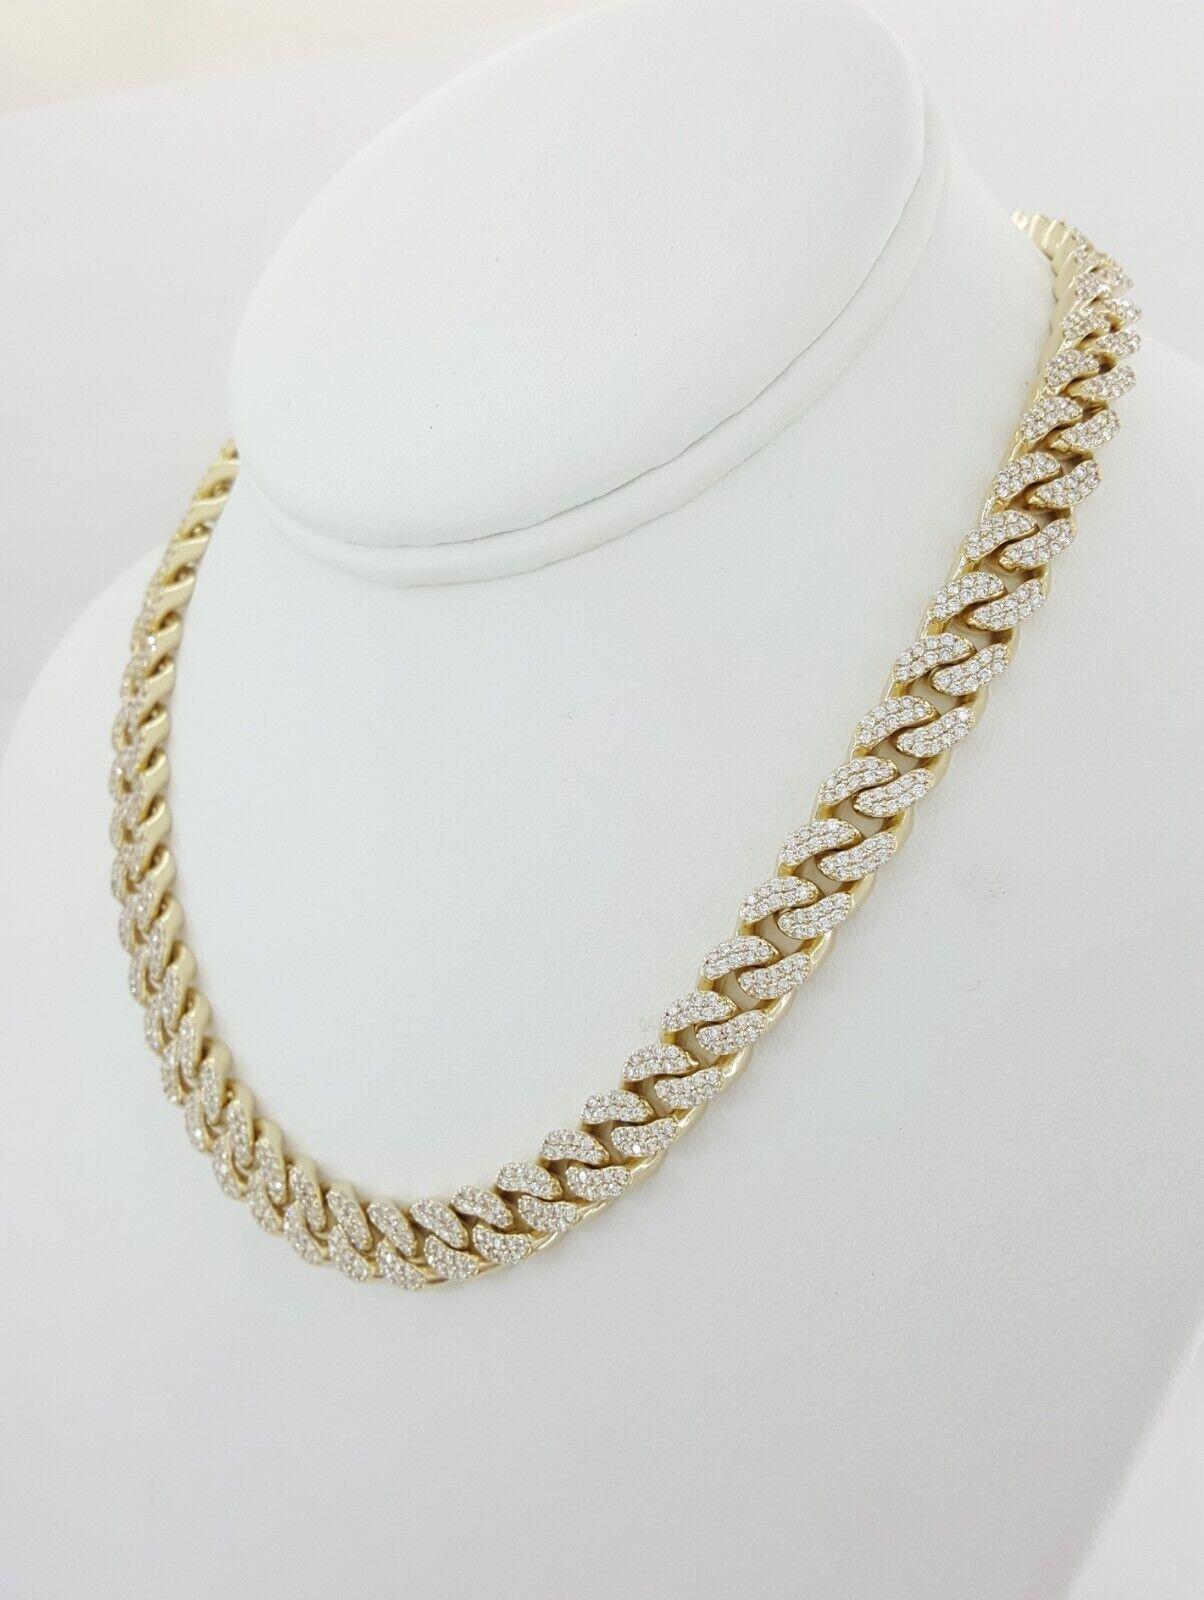 10K Yellow Gold 13.7 ct Total Weight Round Brilliant Cut Diamonds Solid Cuban Link Chain Necklace.

The necklace weighs 91.3 grams, 16